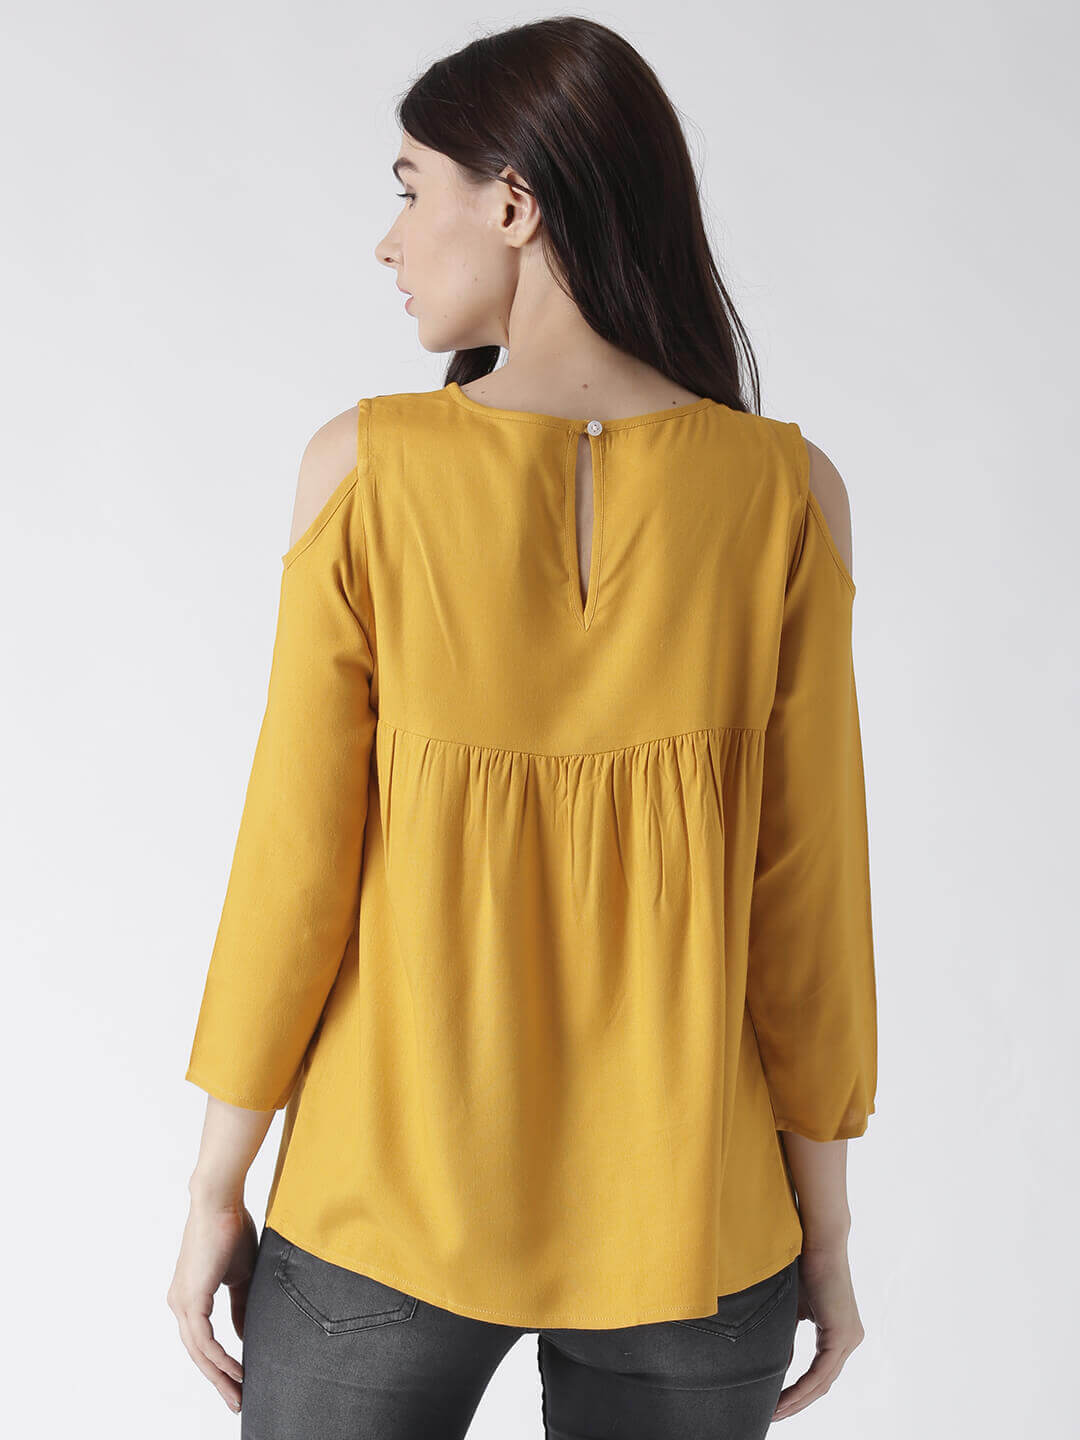 Msfq Women'S Yellow Cold Shoulder Top With Yoke Embroidery